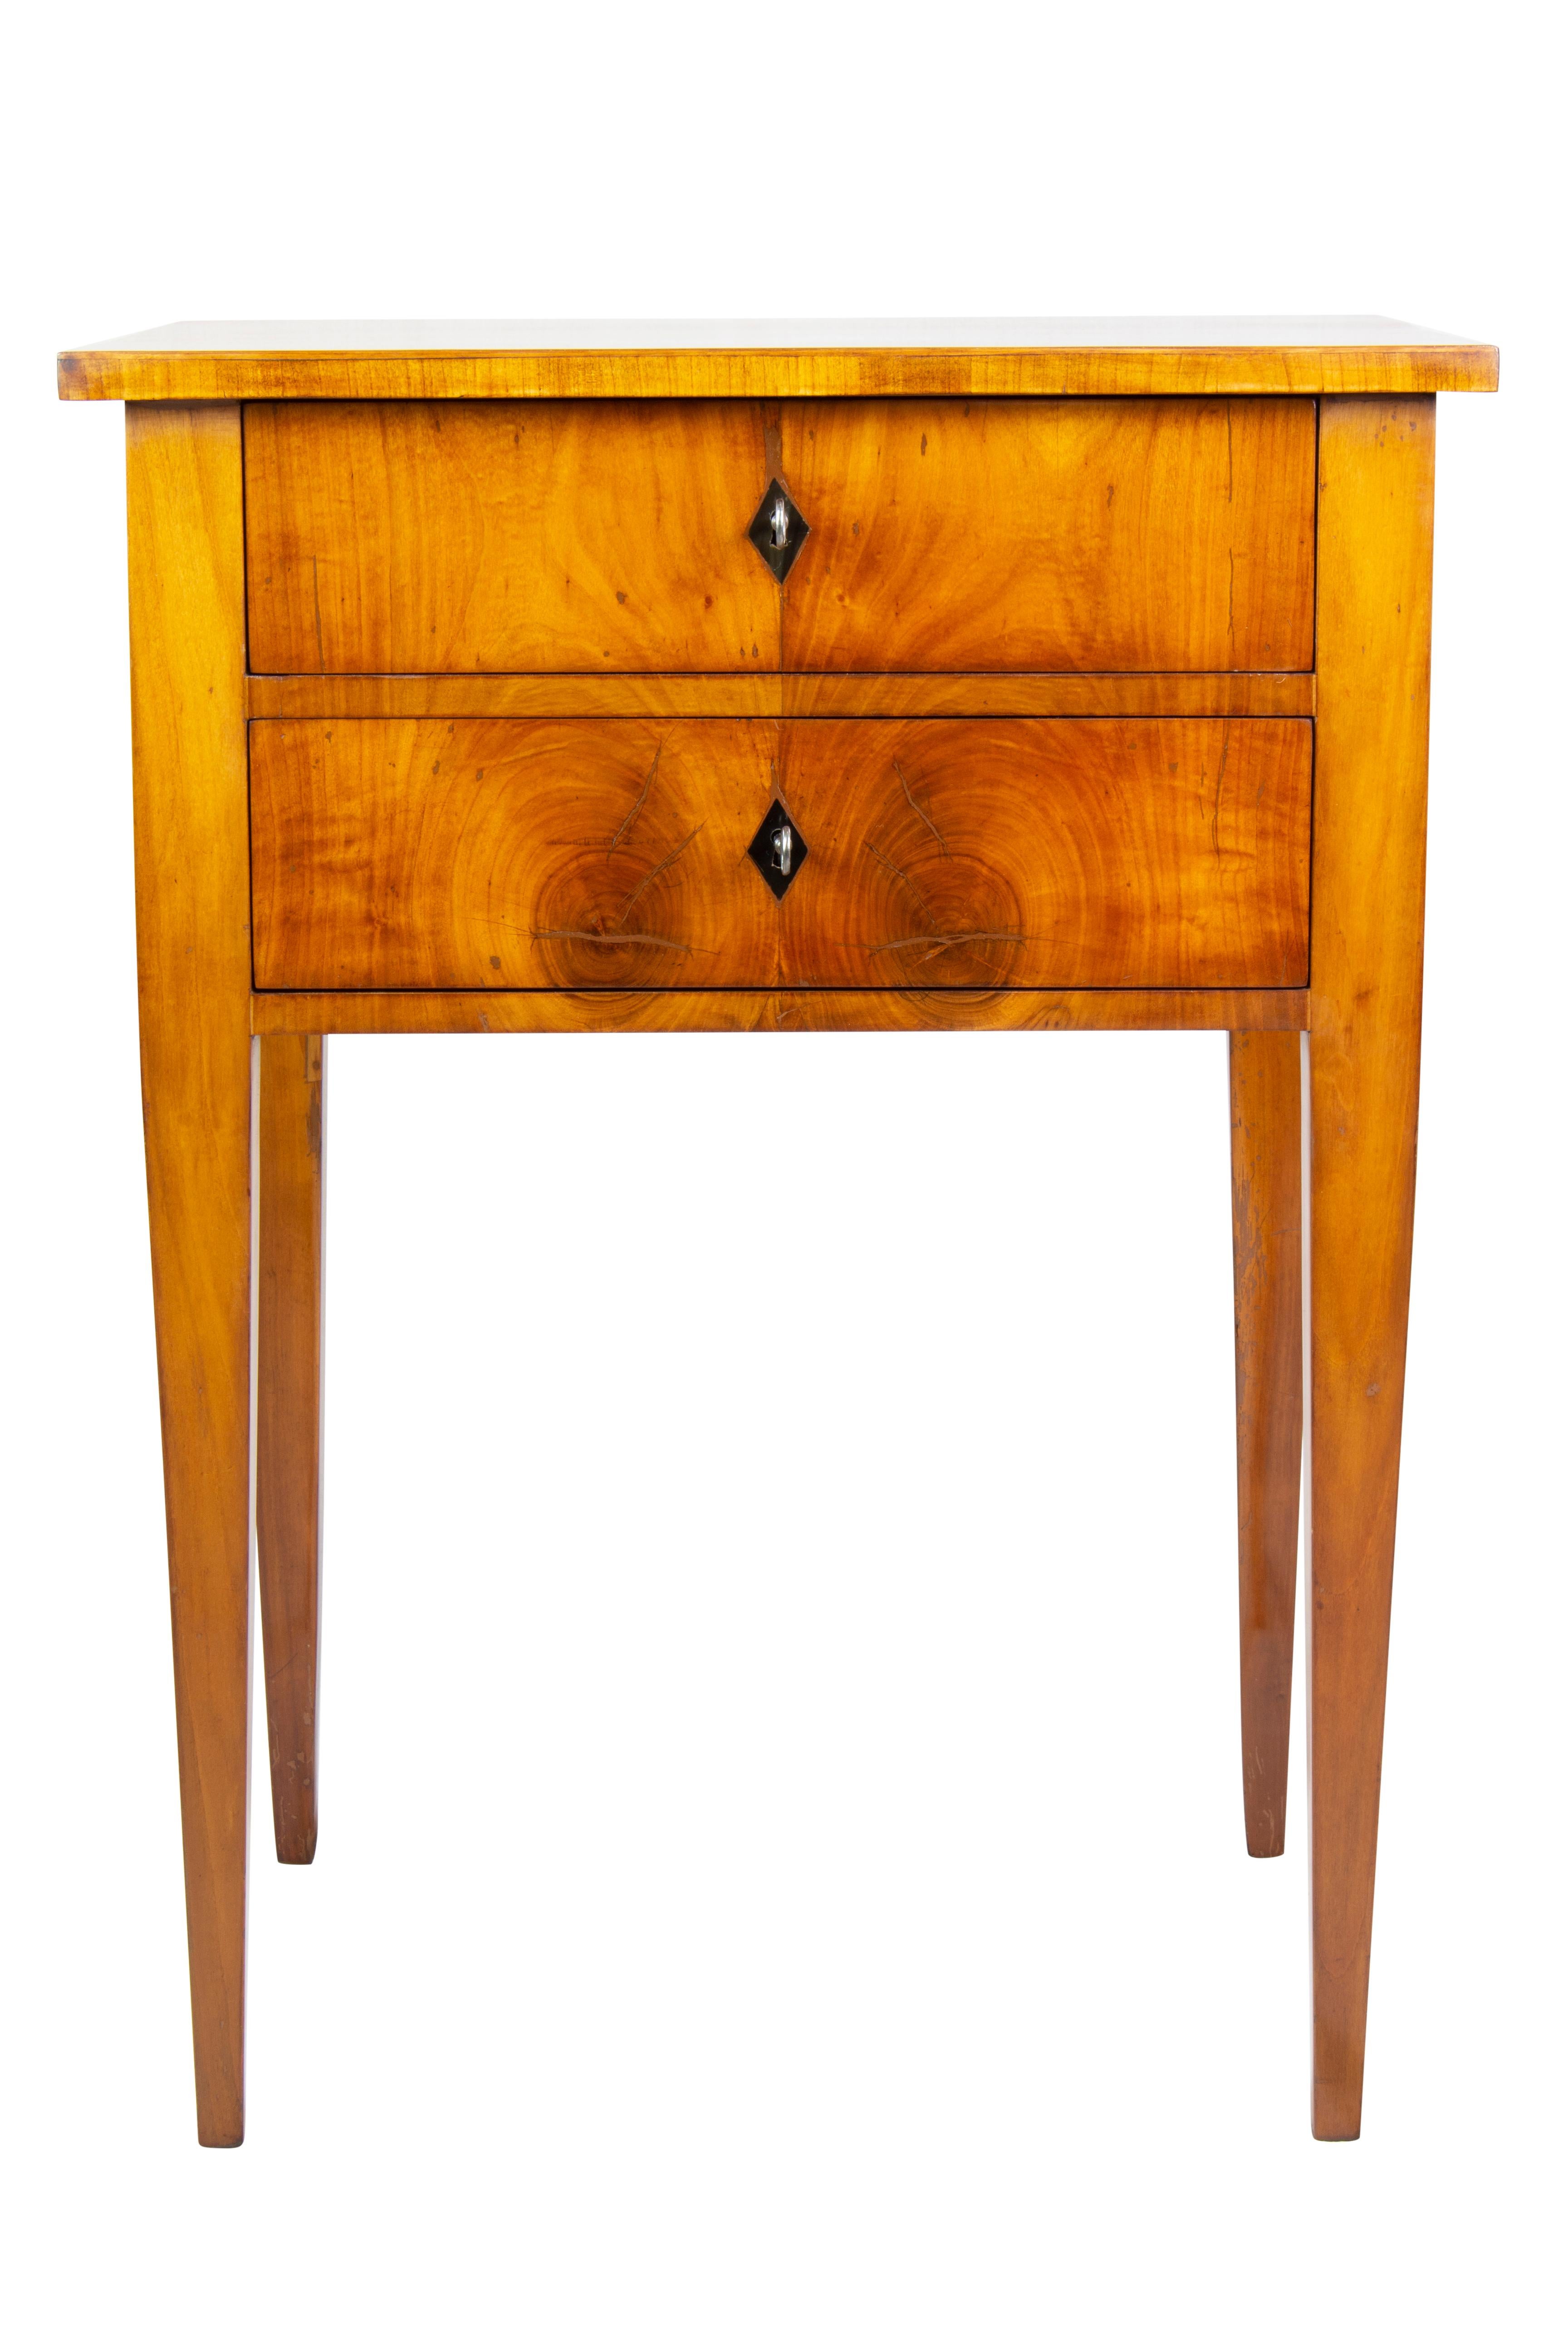 Classic Biedermeier side table with conical straight legs with 2 drawers, the top drawer with the original division. The side table is made of cherry wood veneered on spruce and solid cherry. The furniture is beautifully restored and hand polished